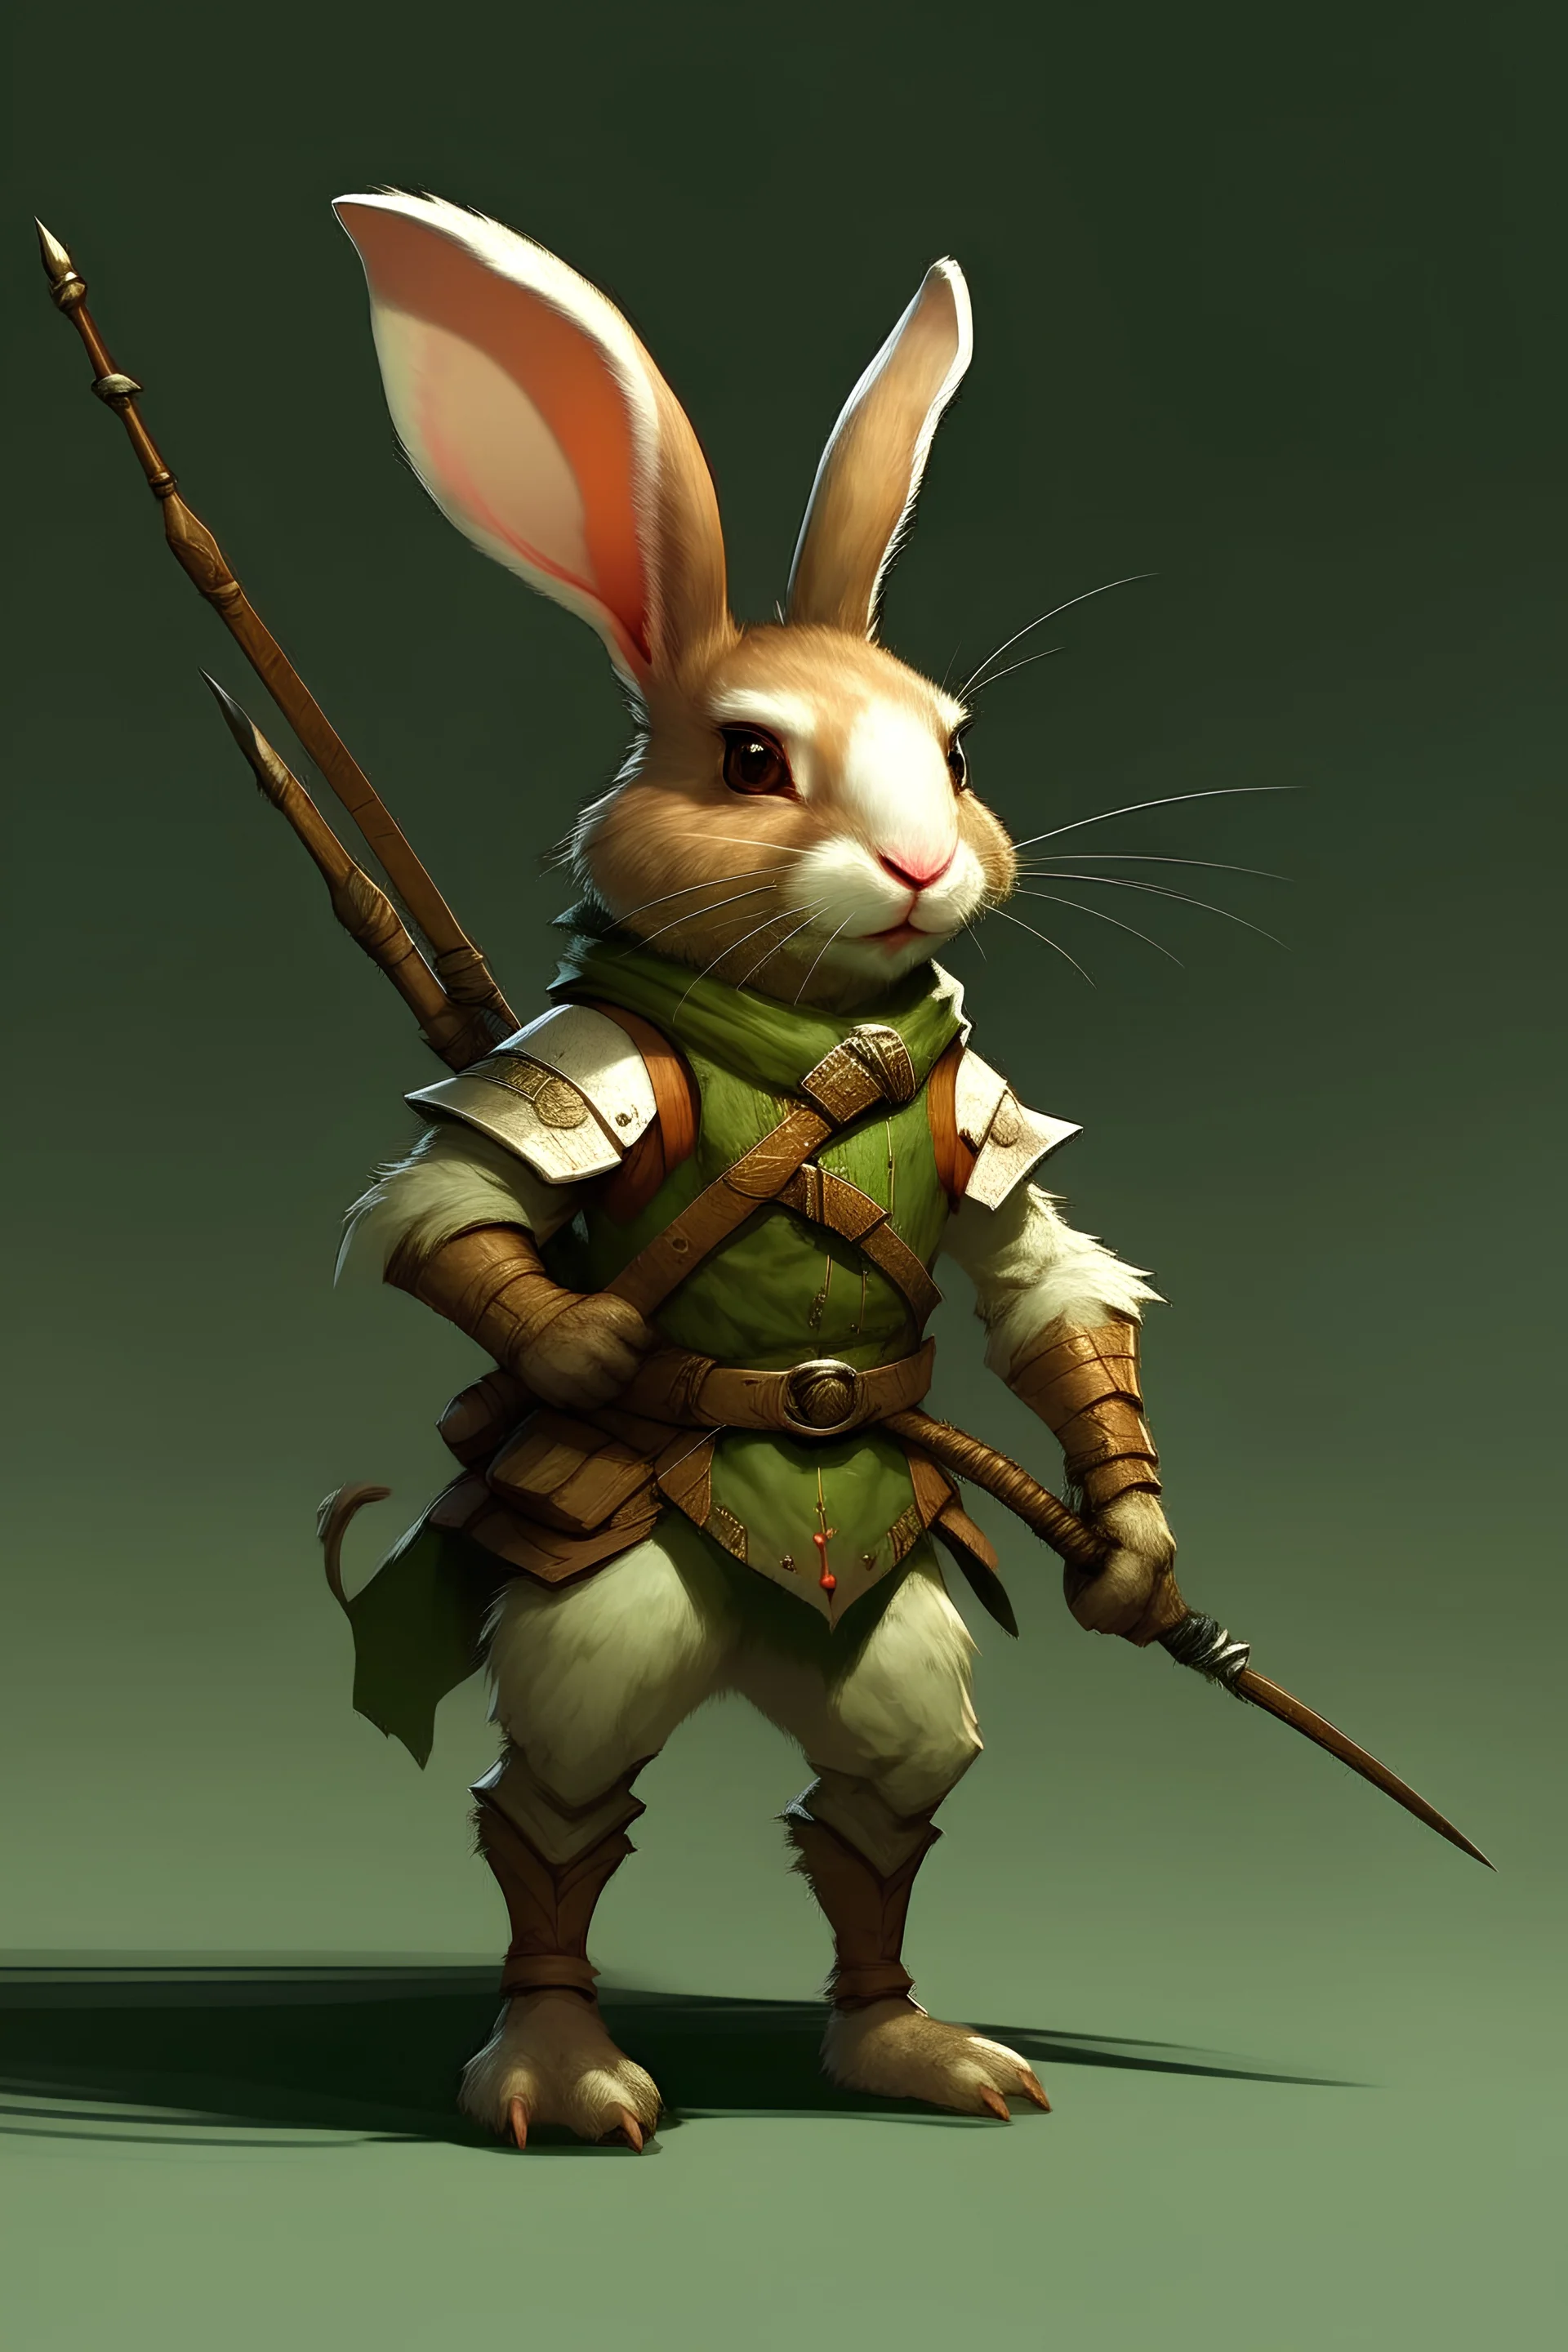 Rabbit Humanoid Ranger with a bow